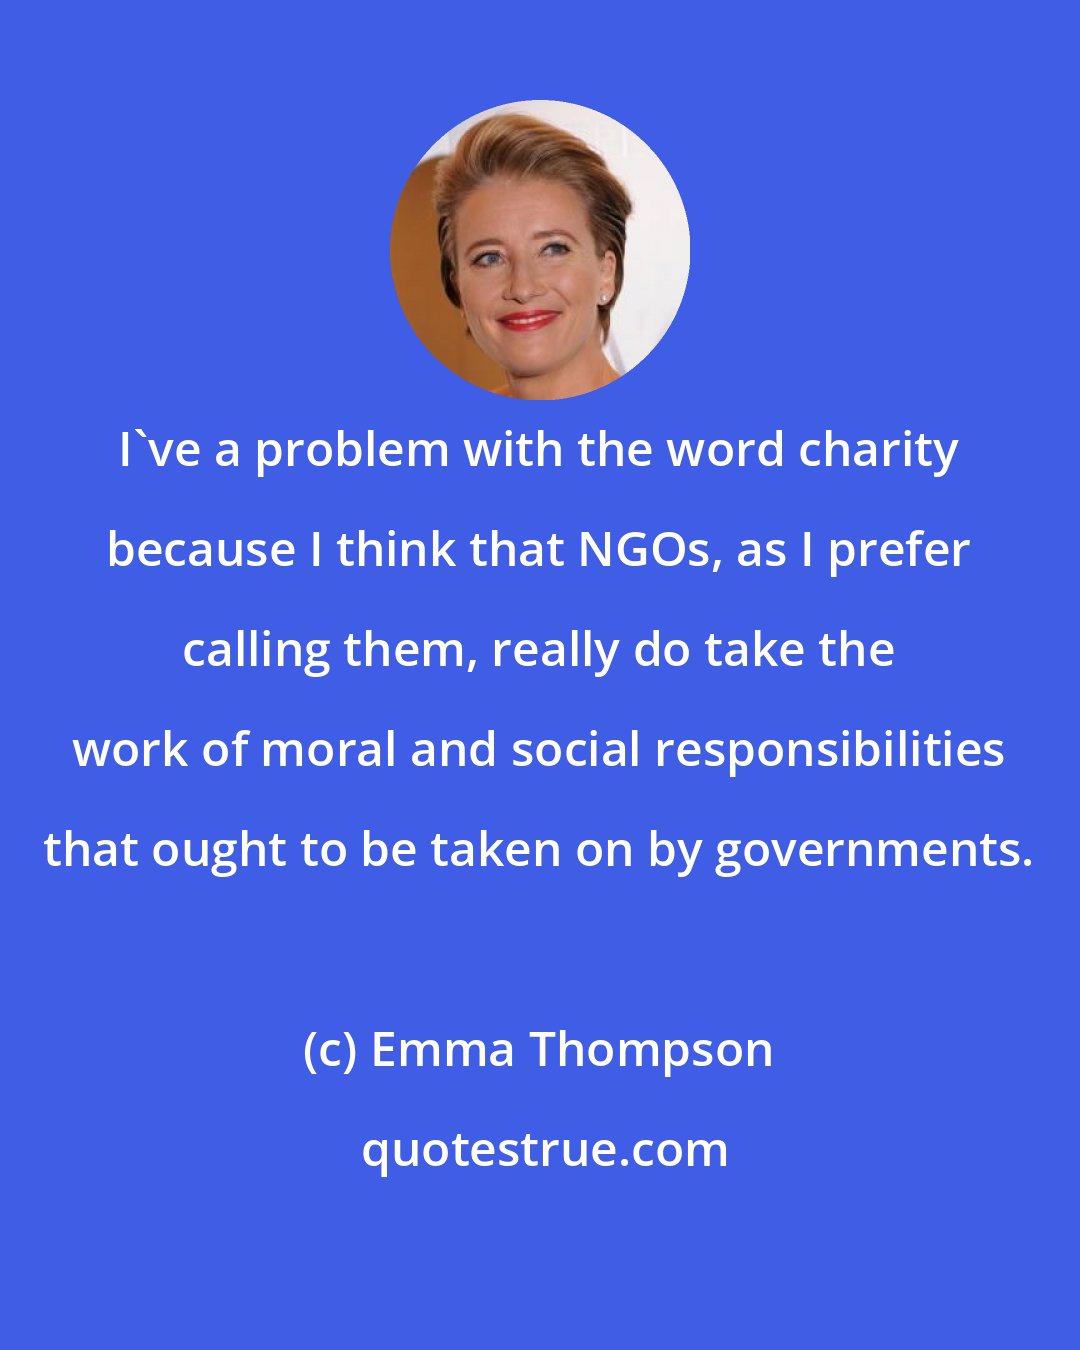 Emma Thompson: I've a problem with the word charity because I think that NGOs, as I prefer calling them, really do take the work of moral and social responsibilities that ought to be taken on by governments.